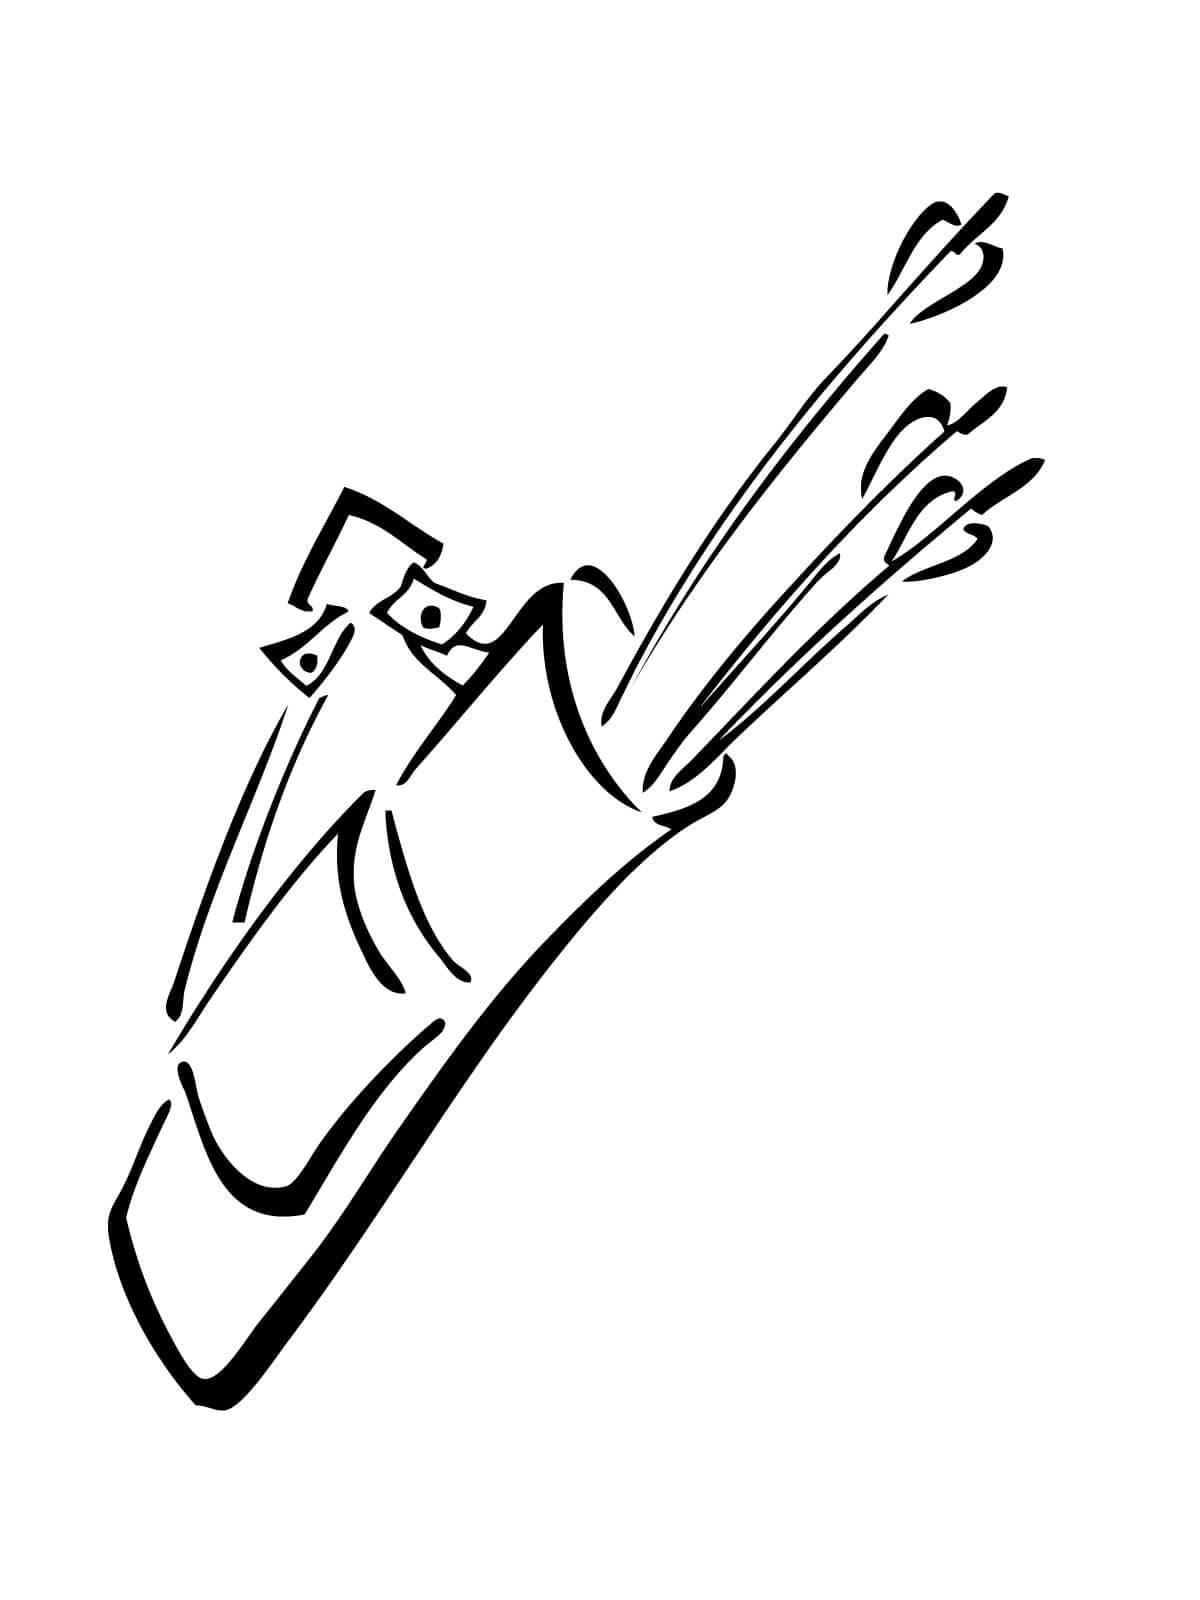 Archery Picture For Kids Coloring Page